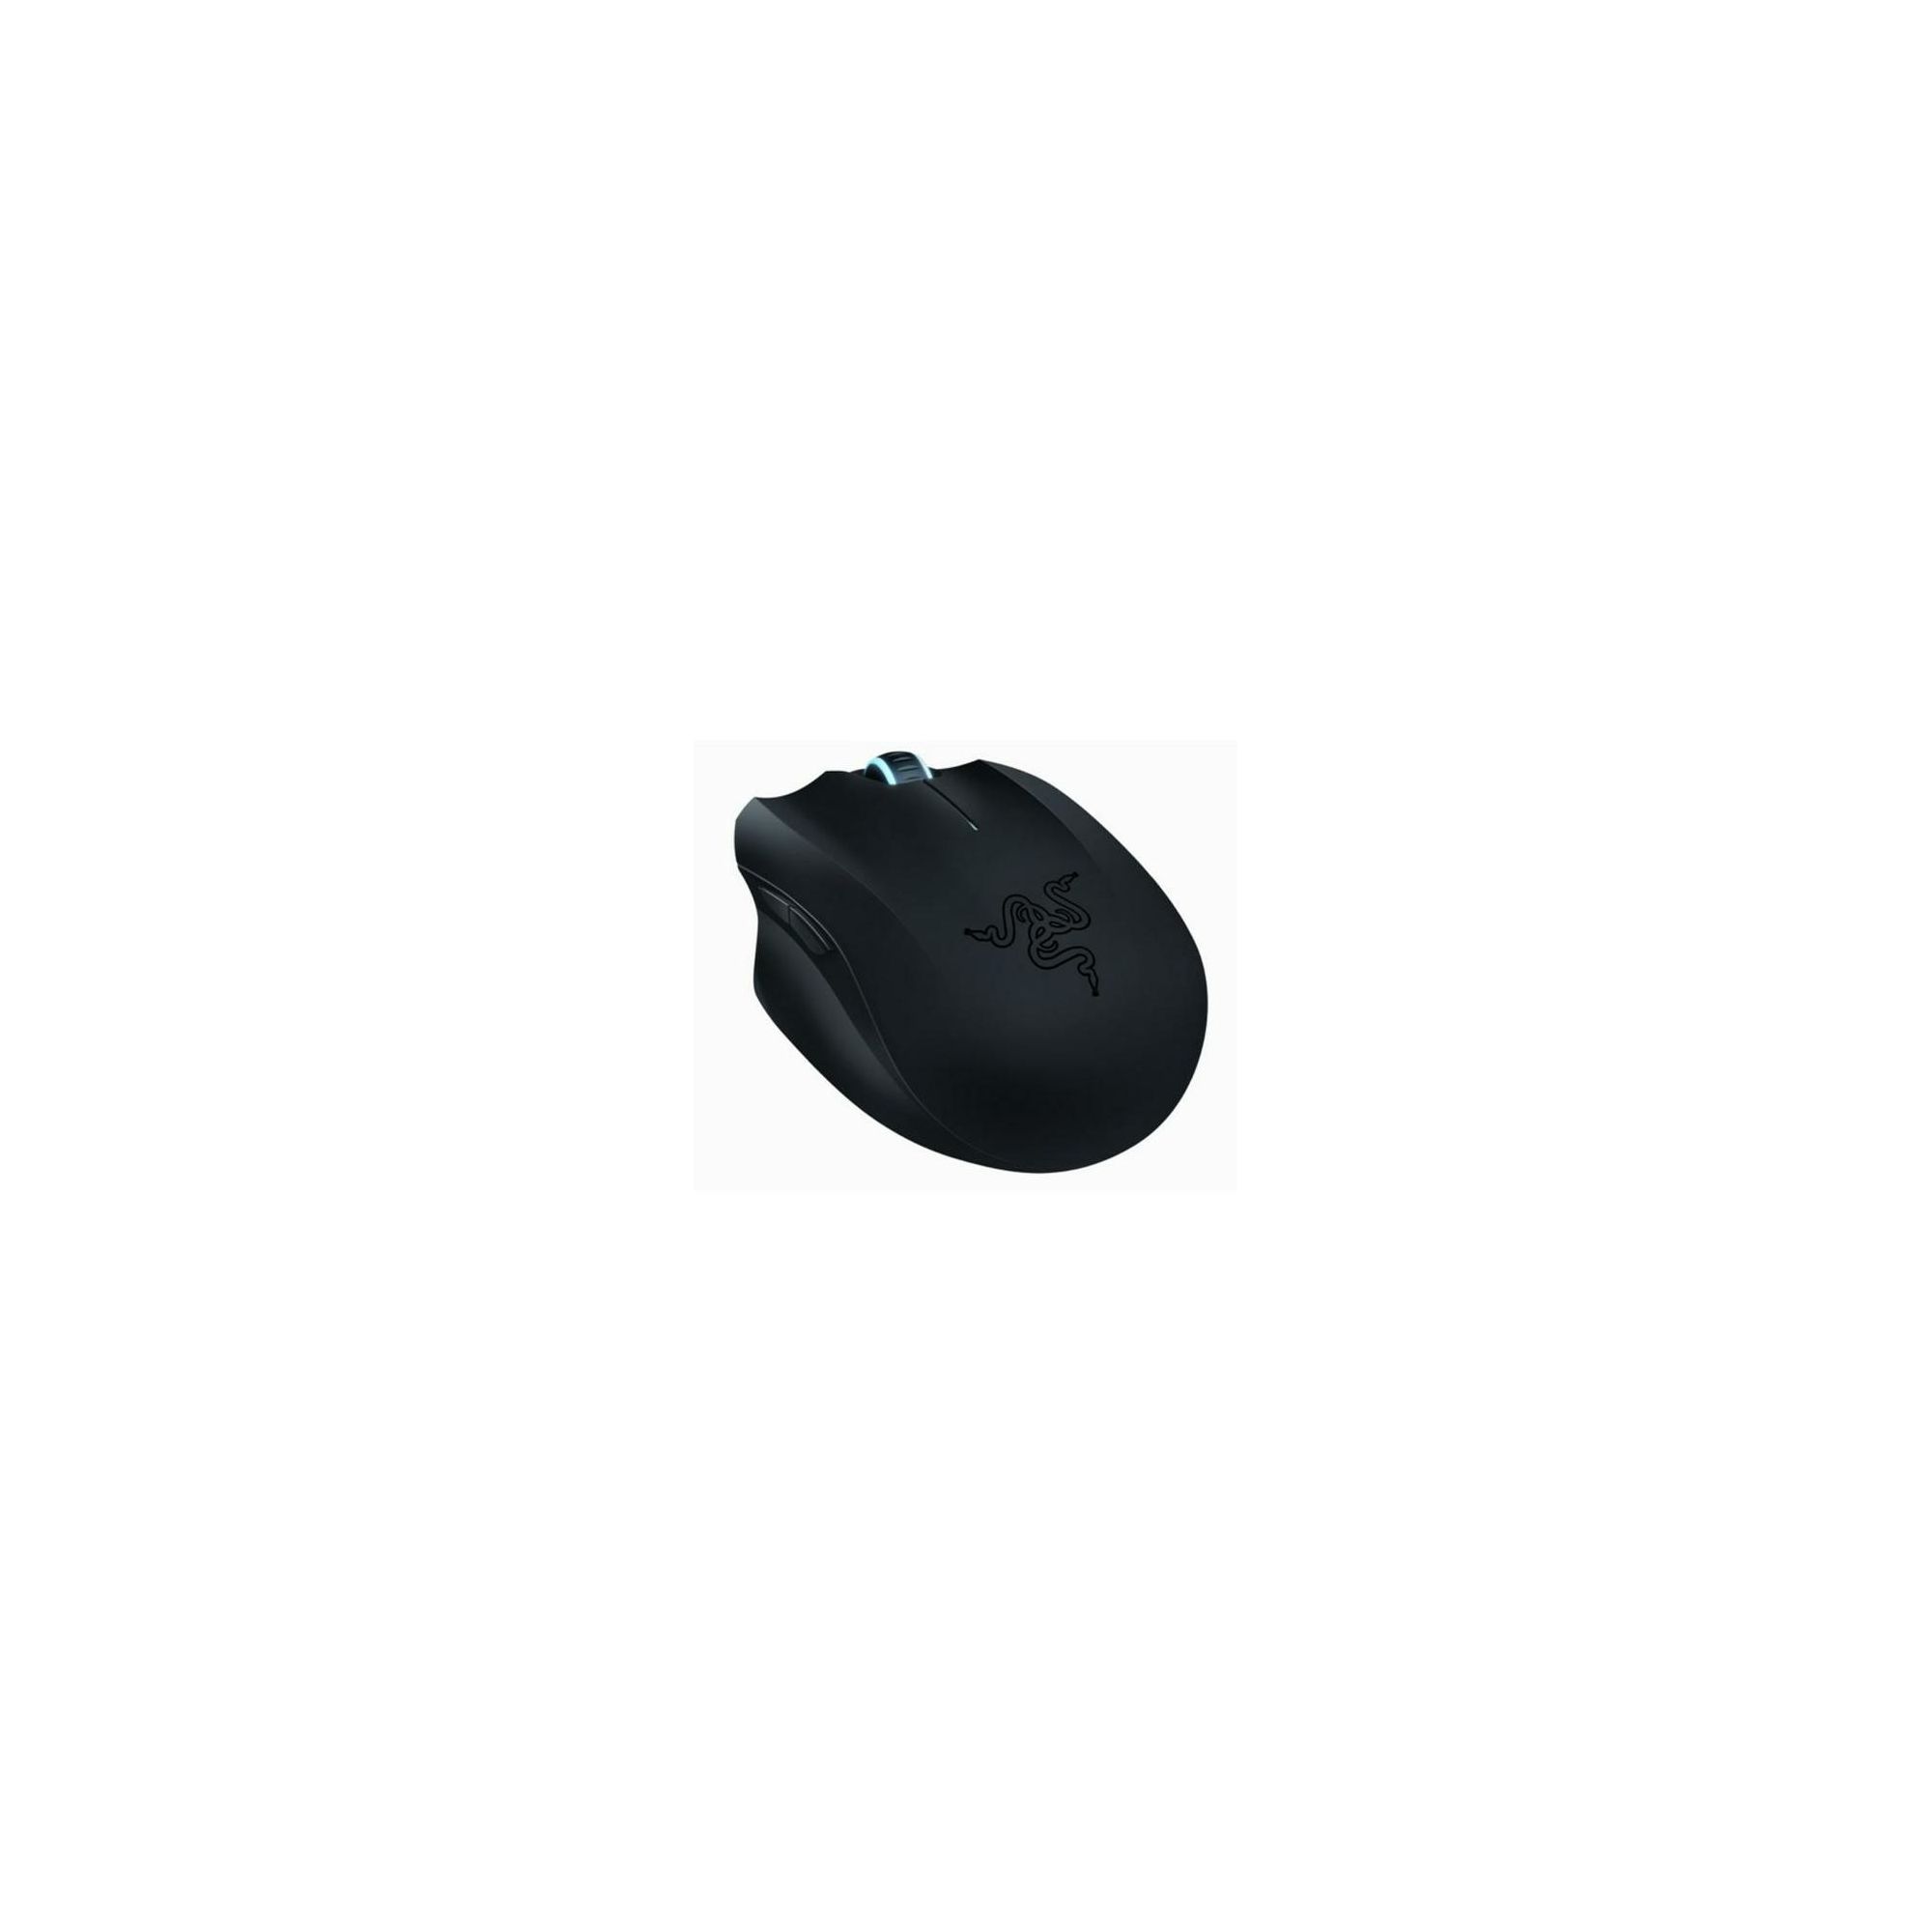 Razer Orochi Gamers Mouse at Tesco Direct